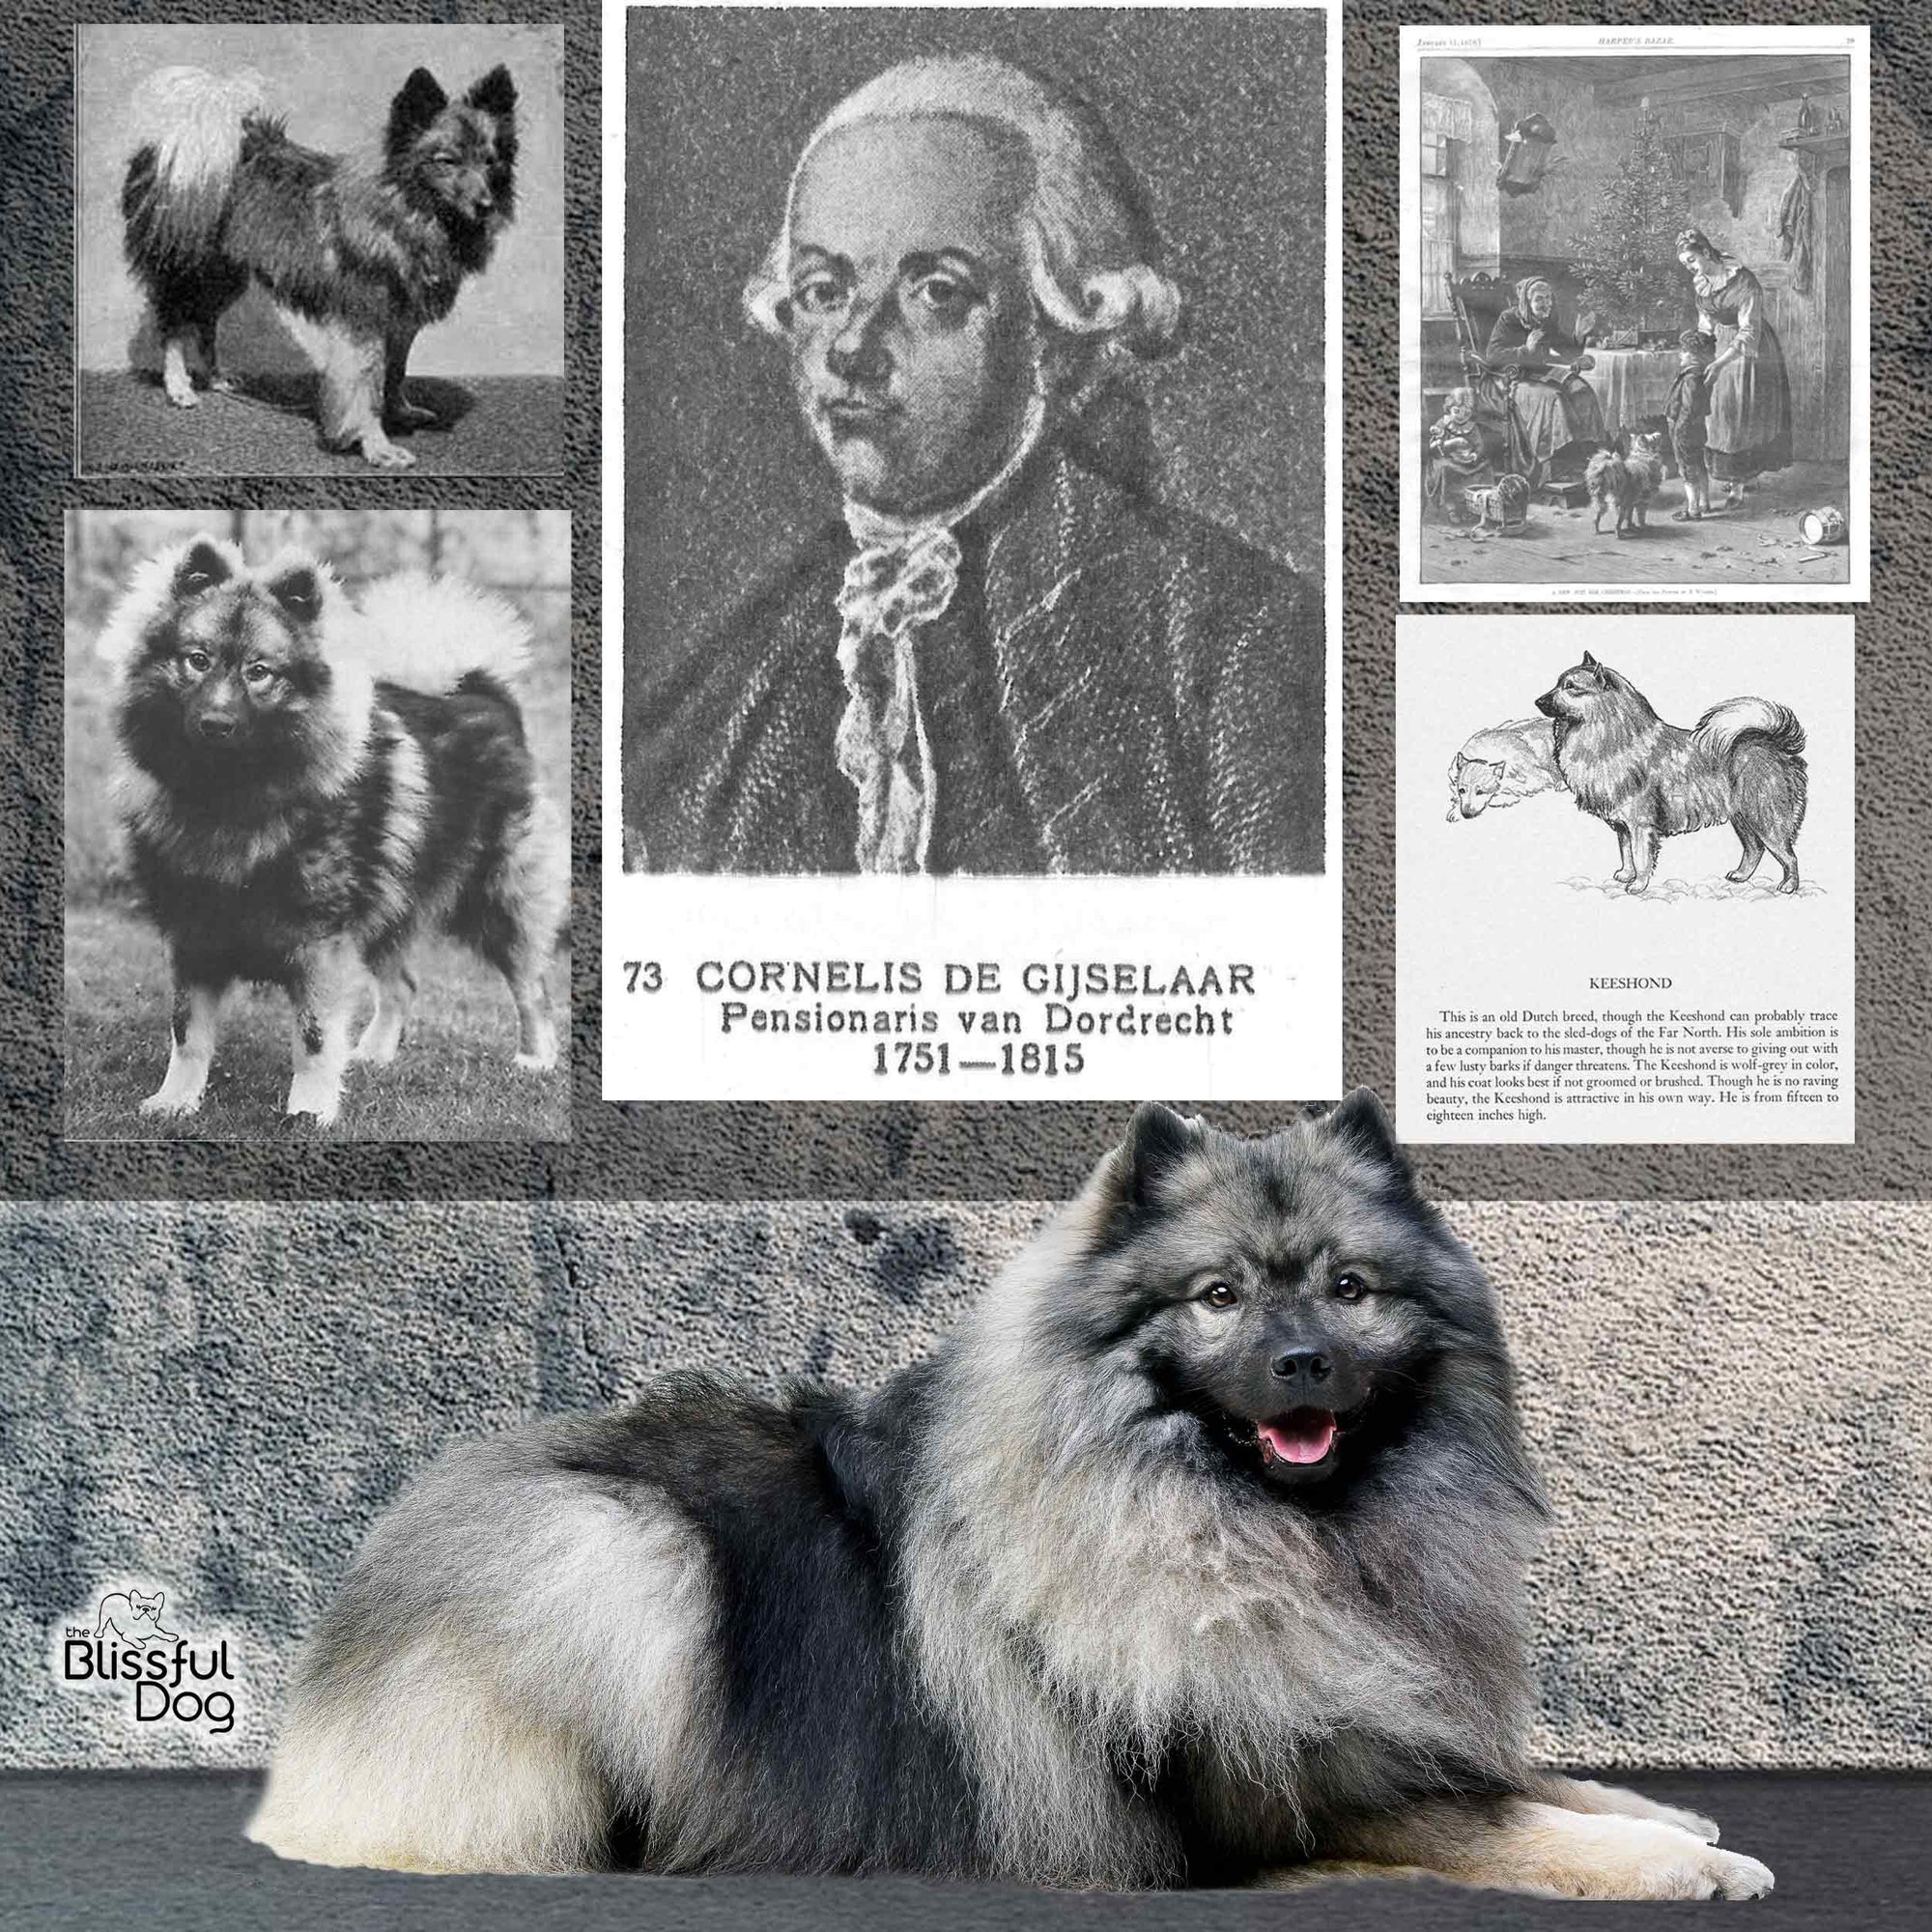 is the keeshond legal in slovenia